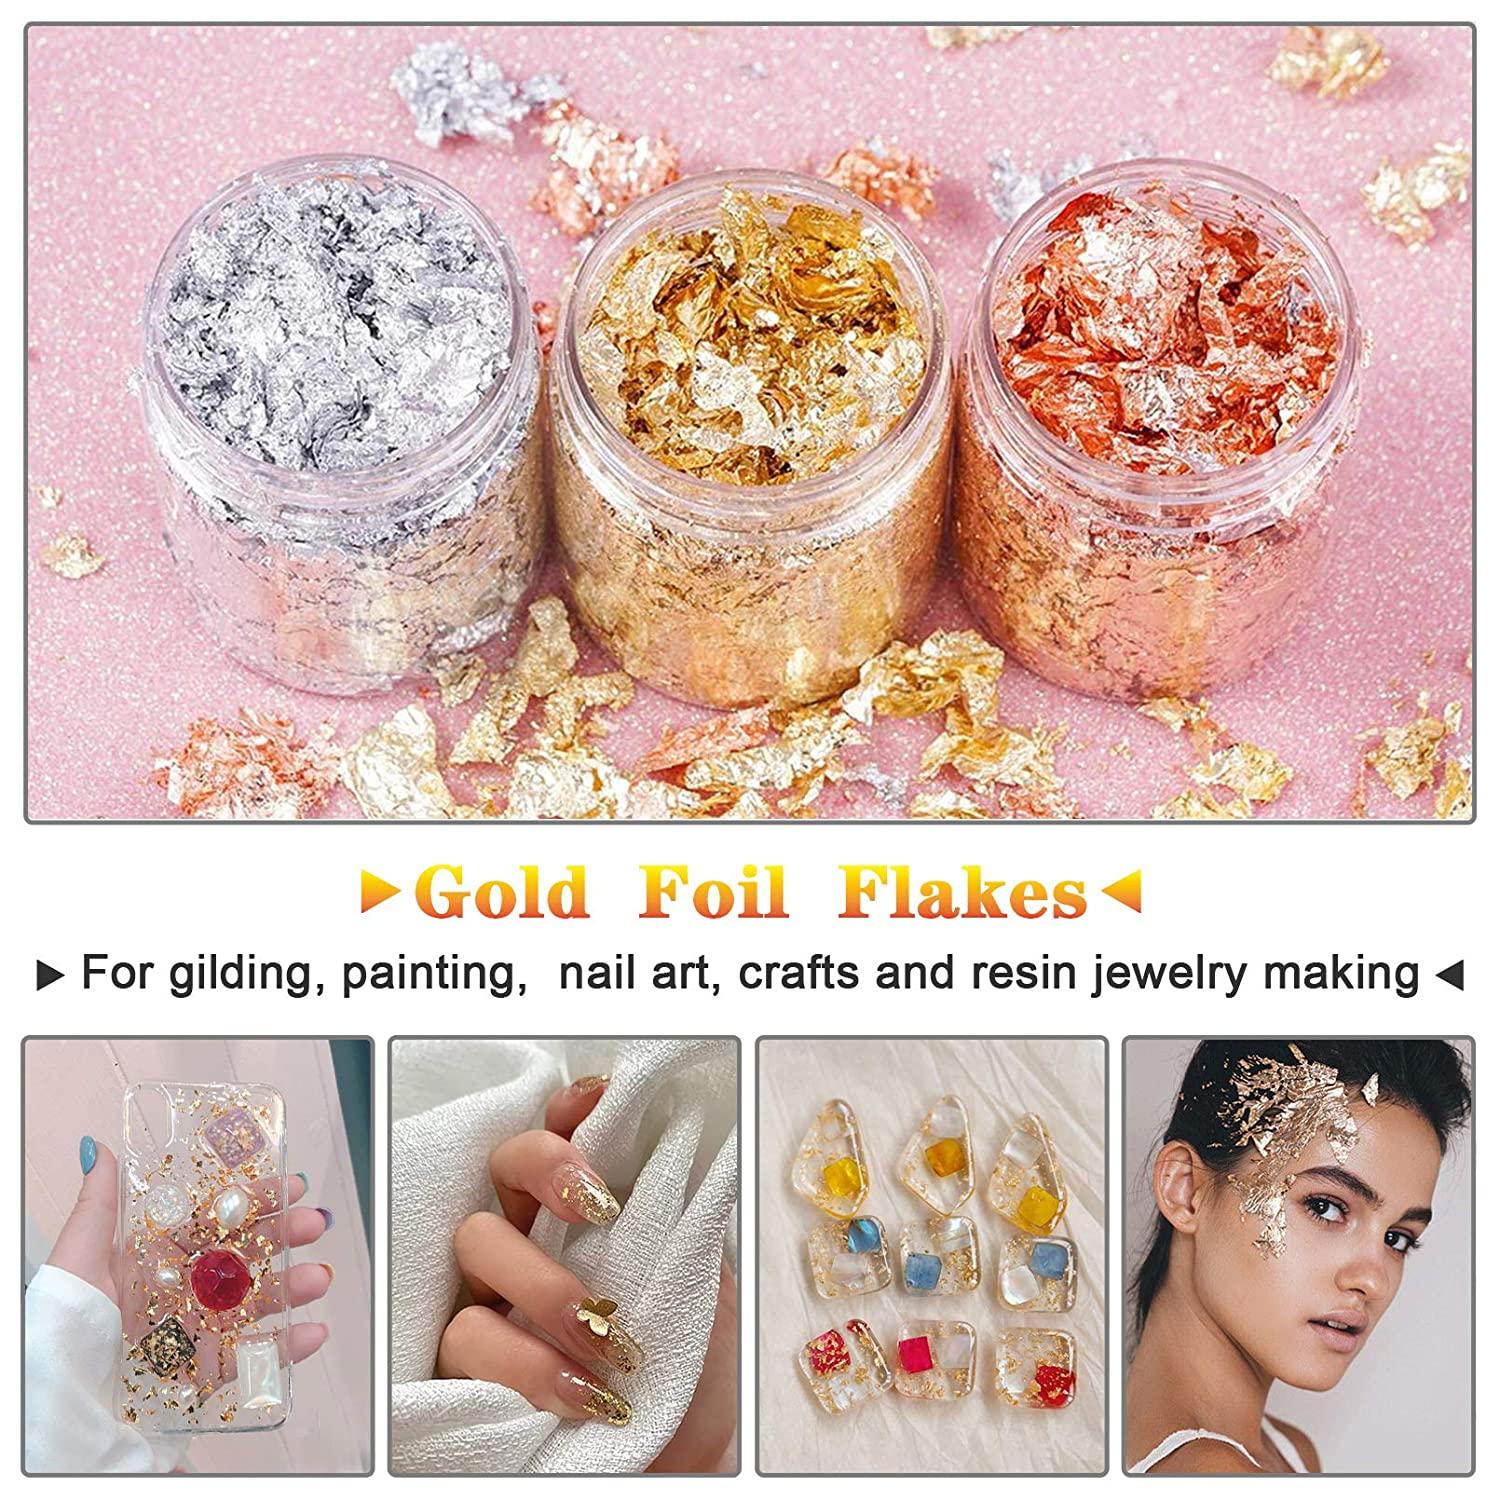 Gold Foil Flakes for Resin,Imitation Gold Foil Flakes Metallic Leaf for  Nails, Painting, Crafts, Slime and Resin Jewelry Making